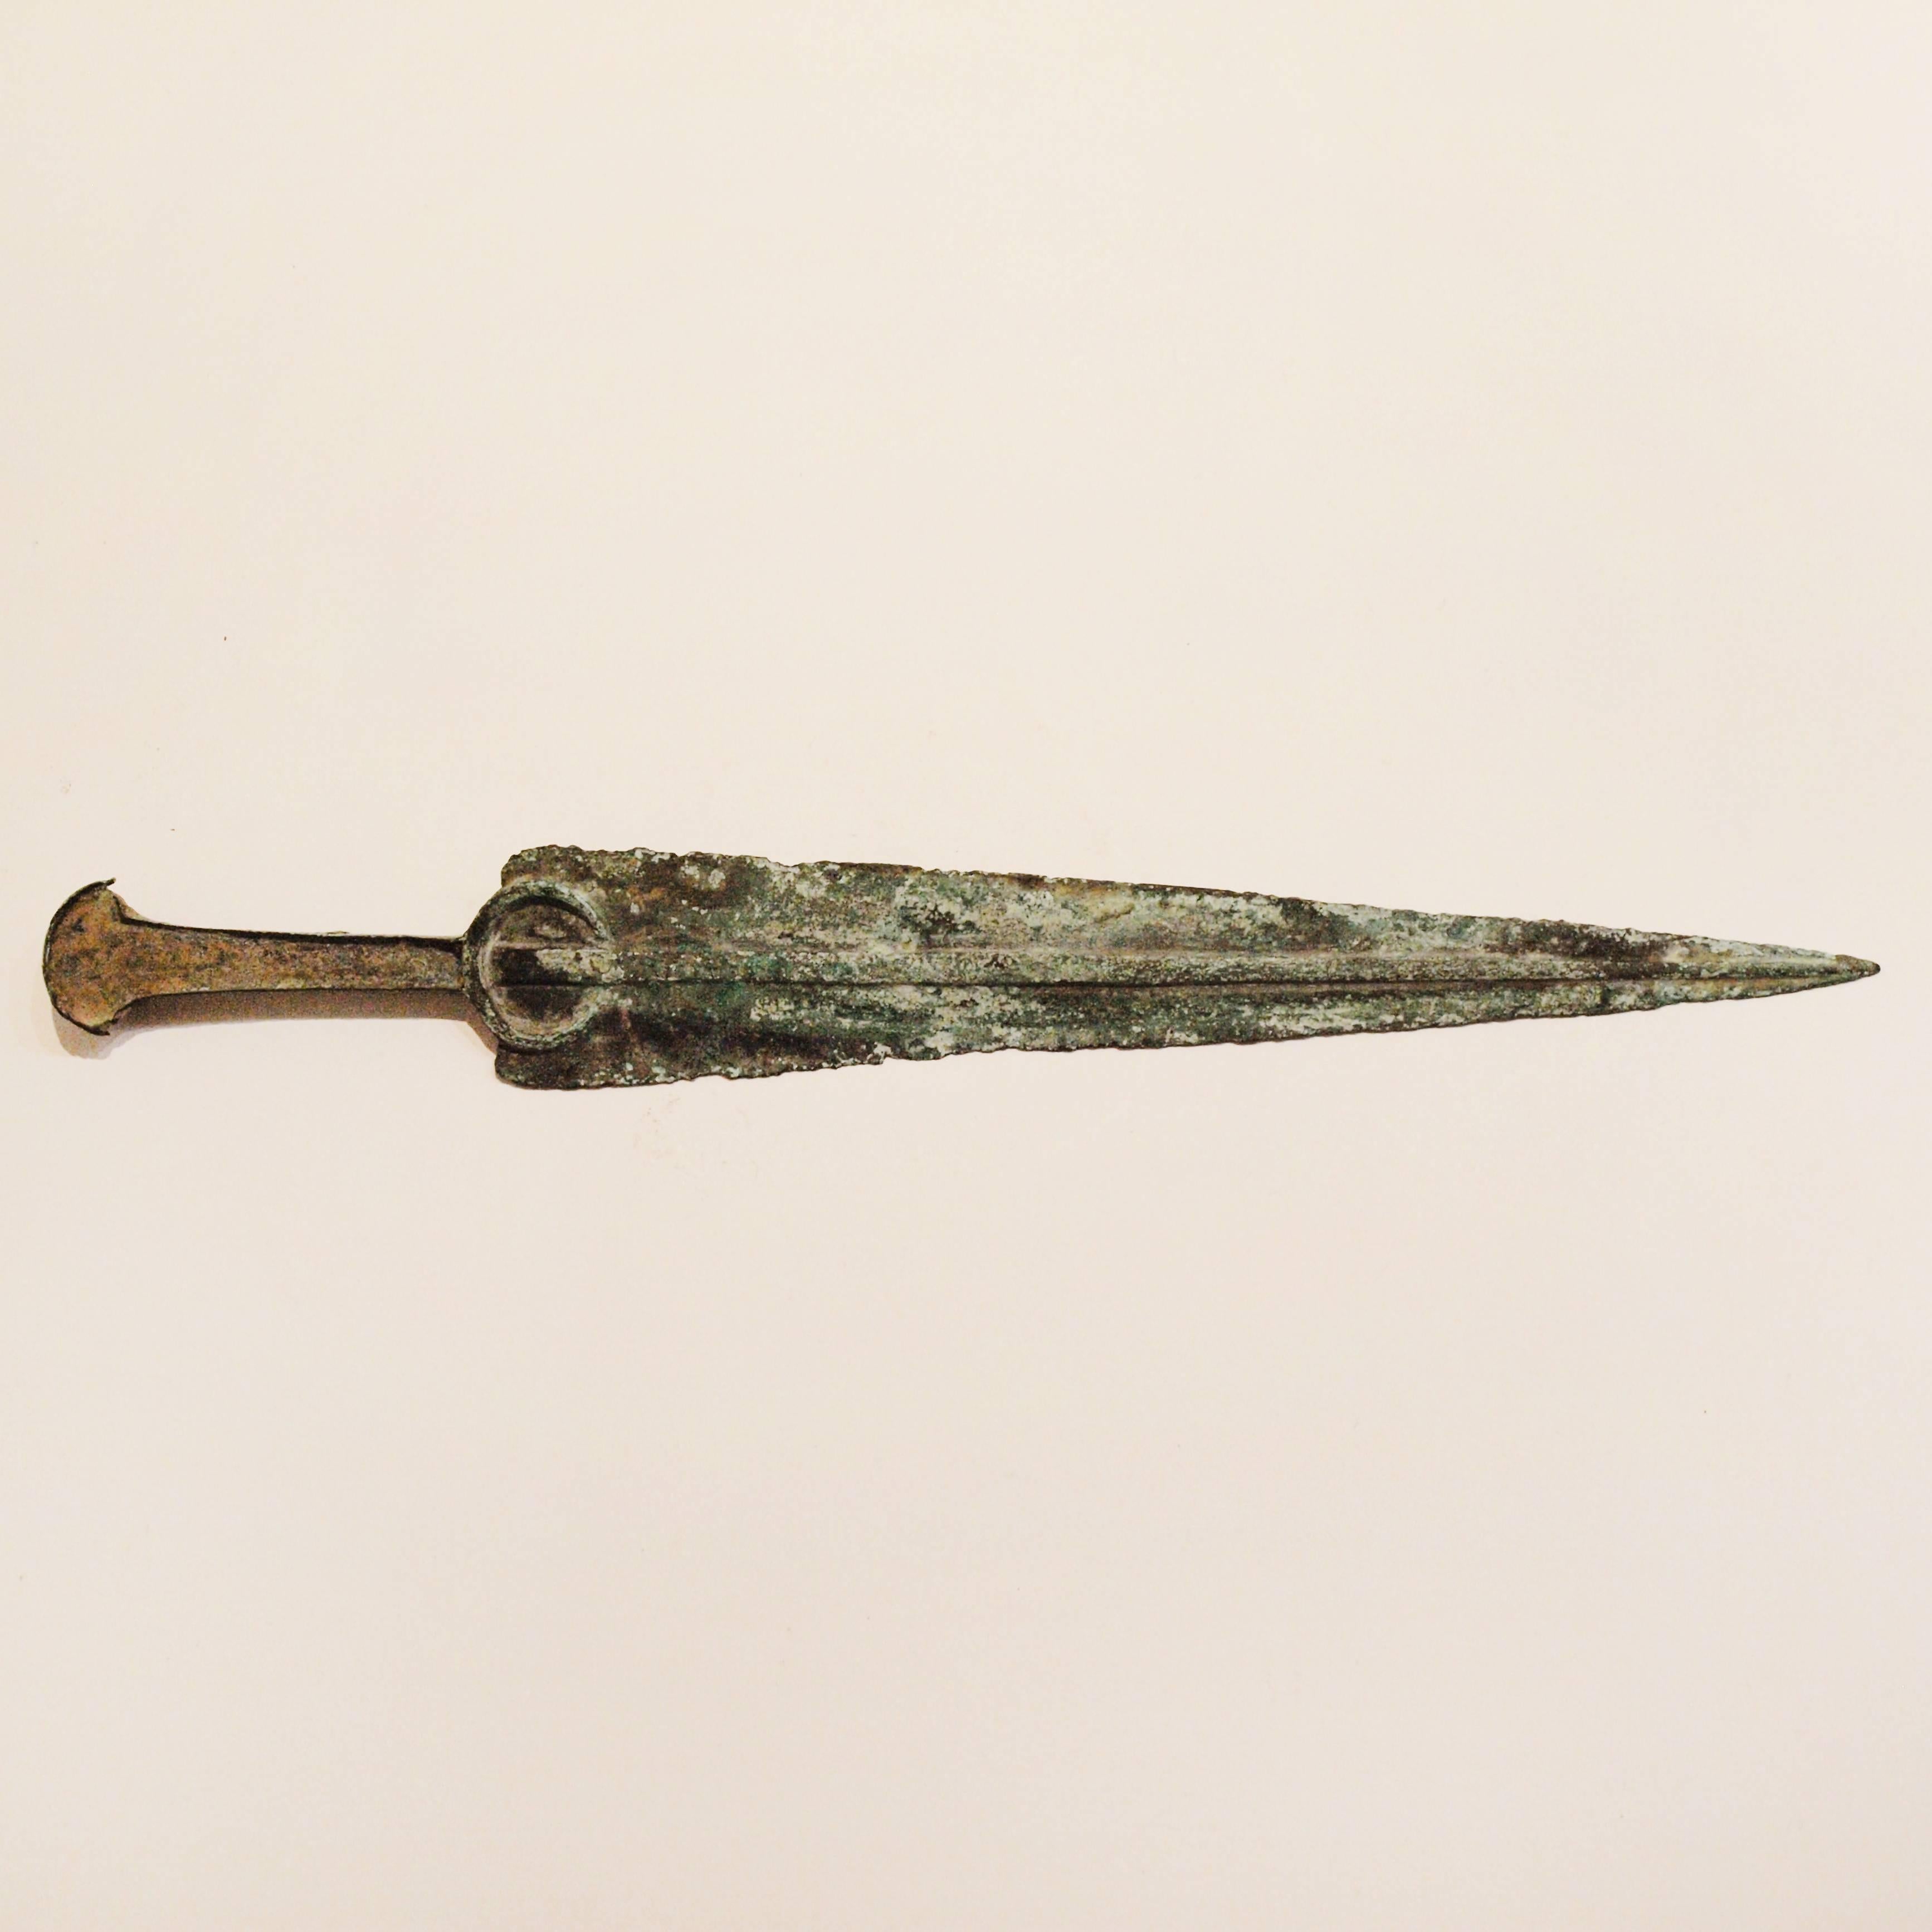 A very fine example of an authentic ancient Luristan bronze dagger, of elegant form, from the Iranian Marlik culture circa 1200 -1000 BC. A tapering double-edged blade with raised central rib and distinctive crescent shaped flanged hilt. 

This is a